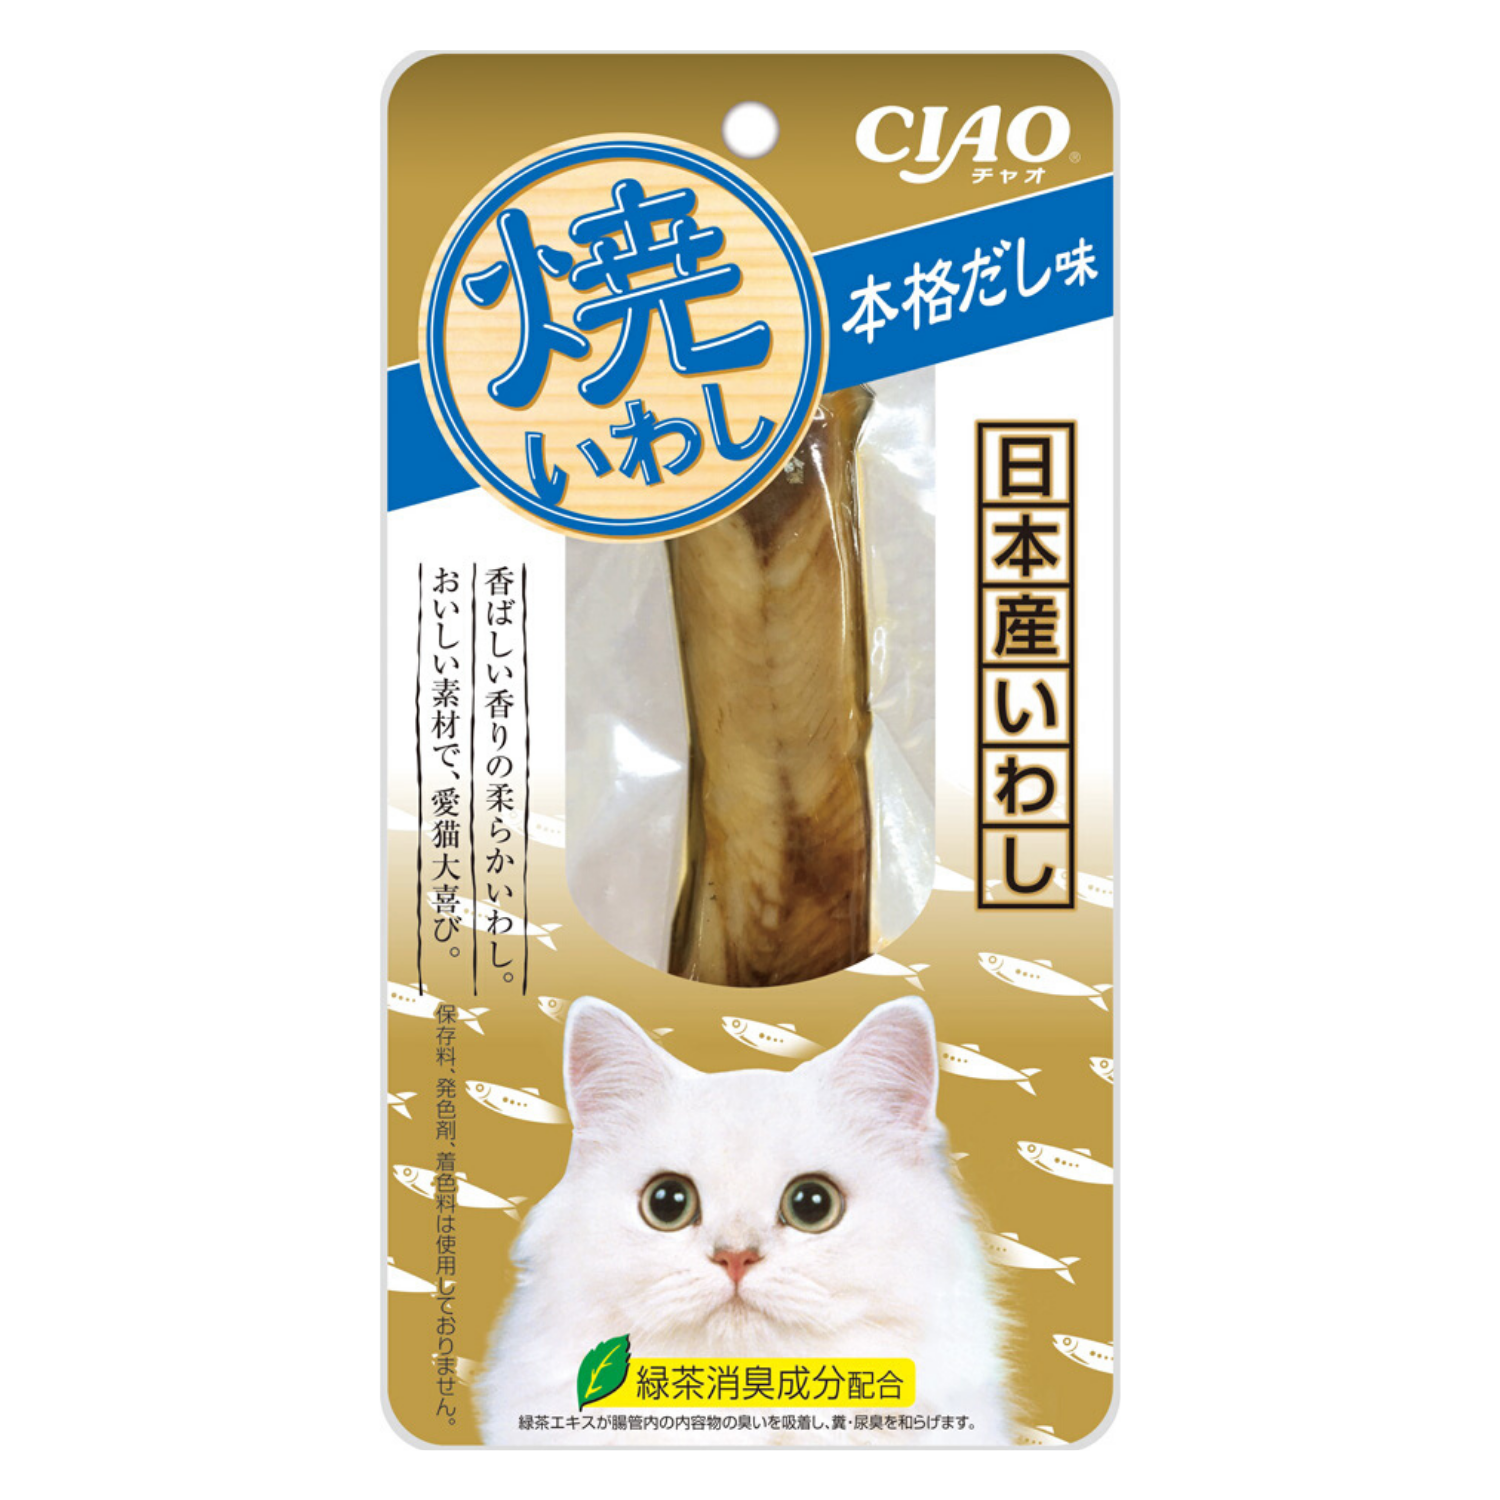 Ciao Iwashi Fillet Japanese Broth Flavor - 20g